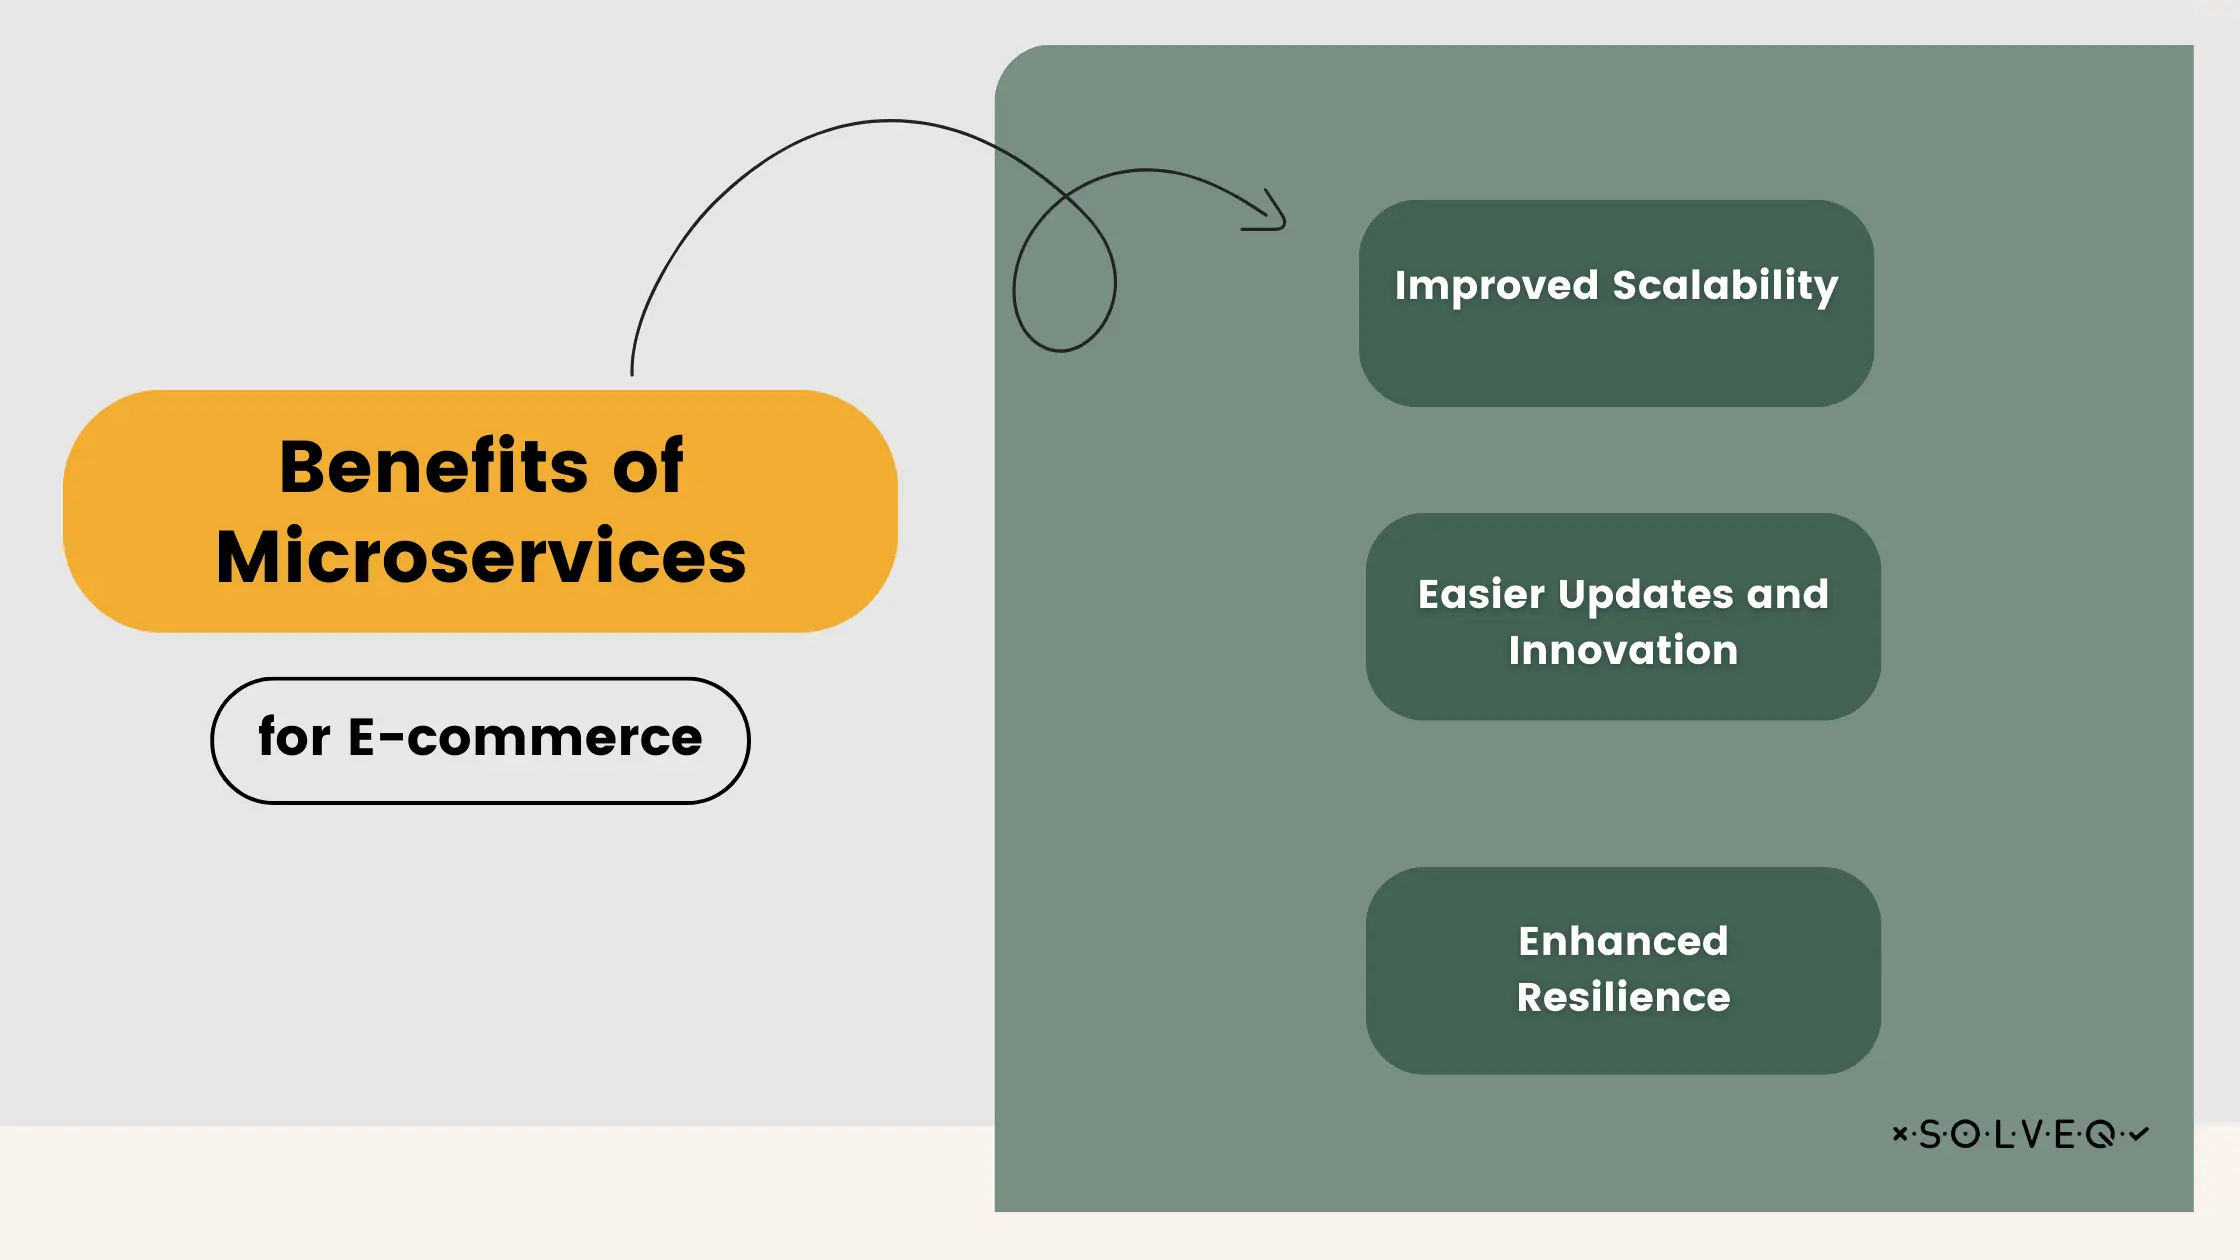 Benefits of Microservices for ecommerce